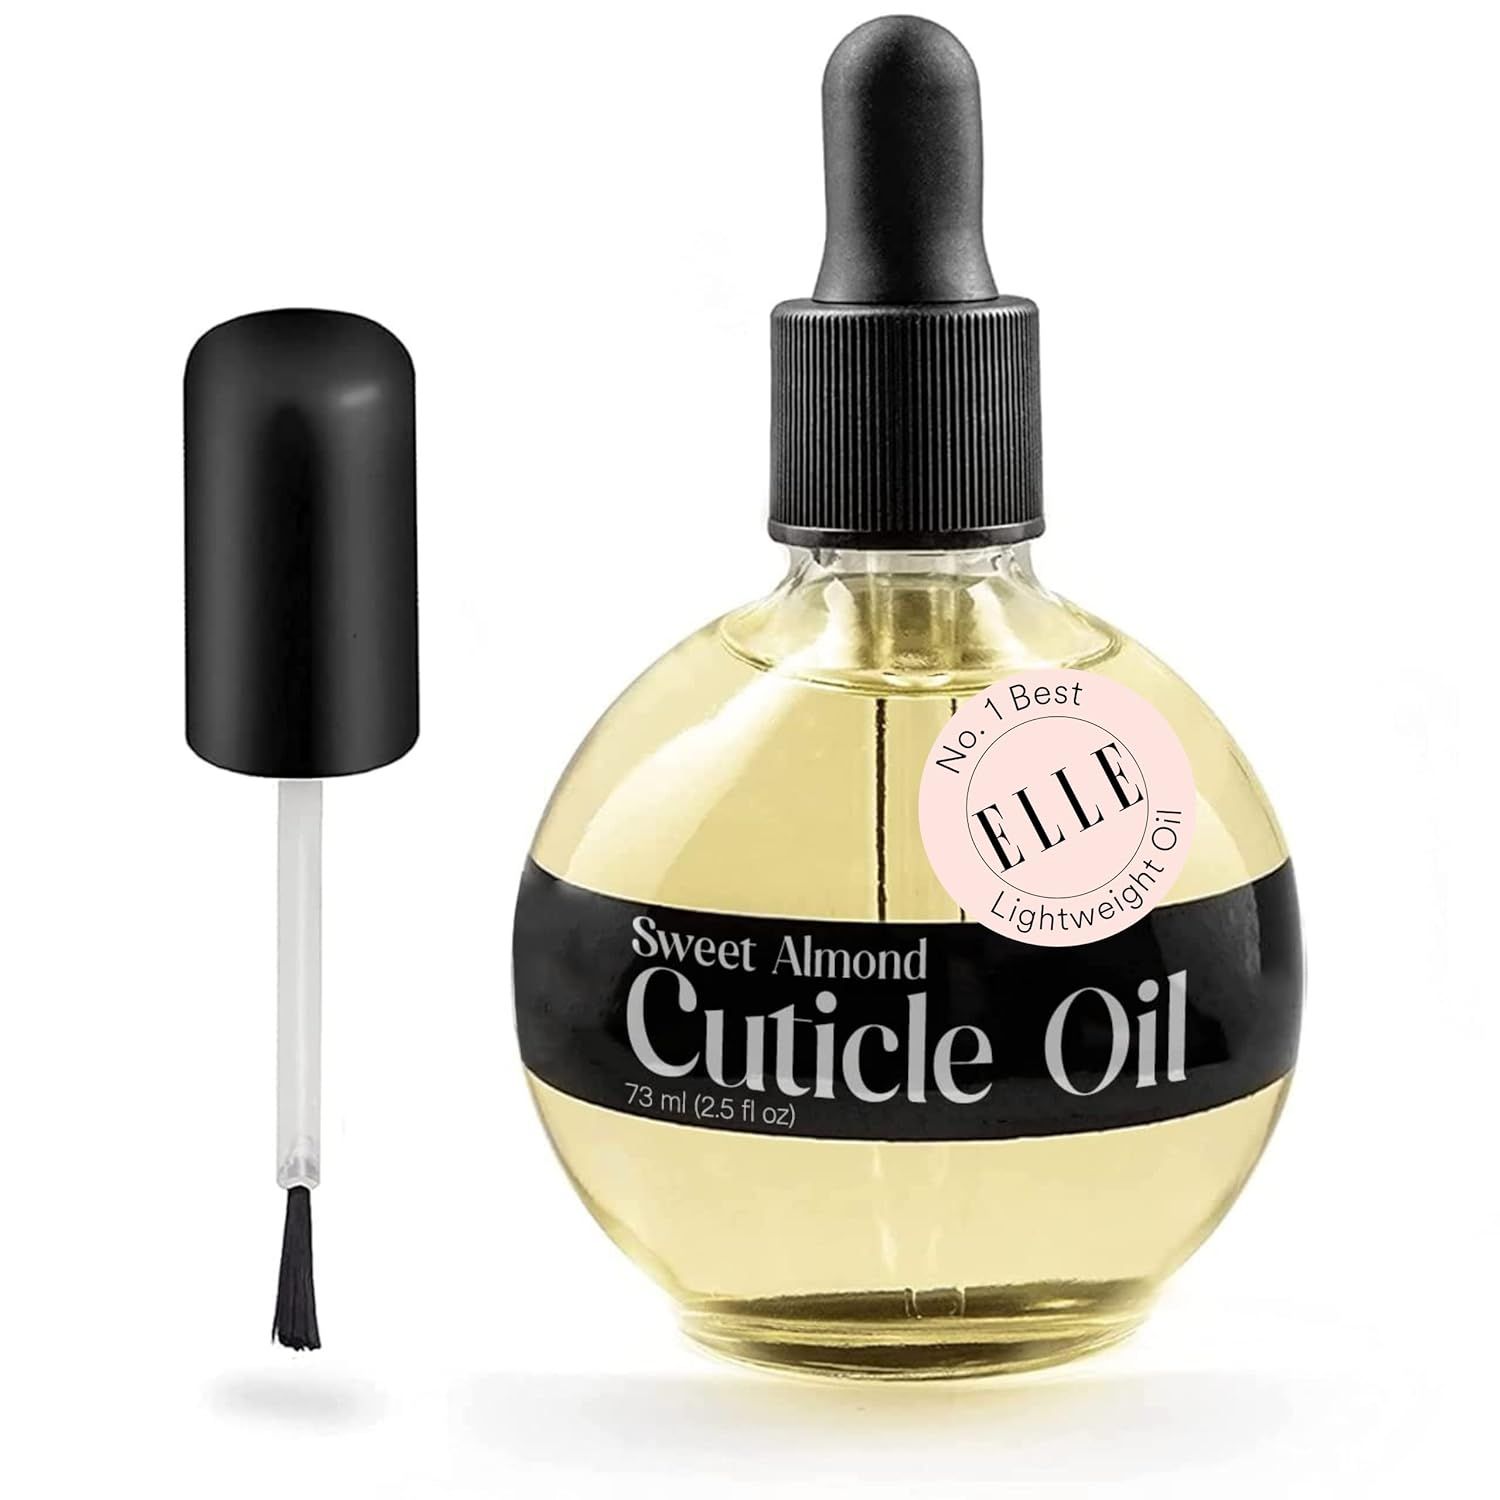 C CARE Sweet Almond Cuticle Oil For Nails - Repairs Cuticles Overnight - Moisturizes and Strength... | Amazon (US)